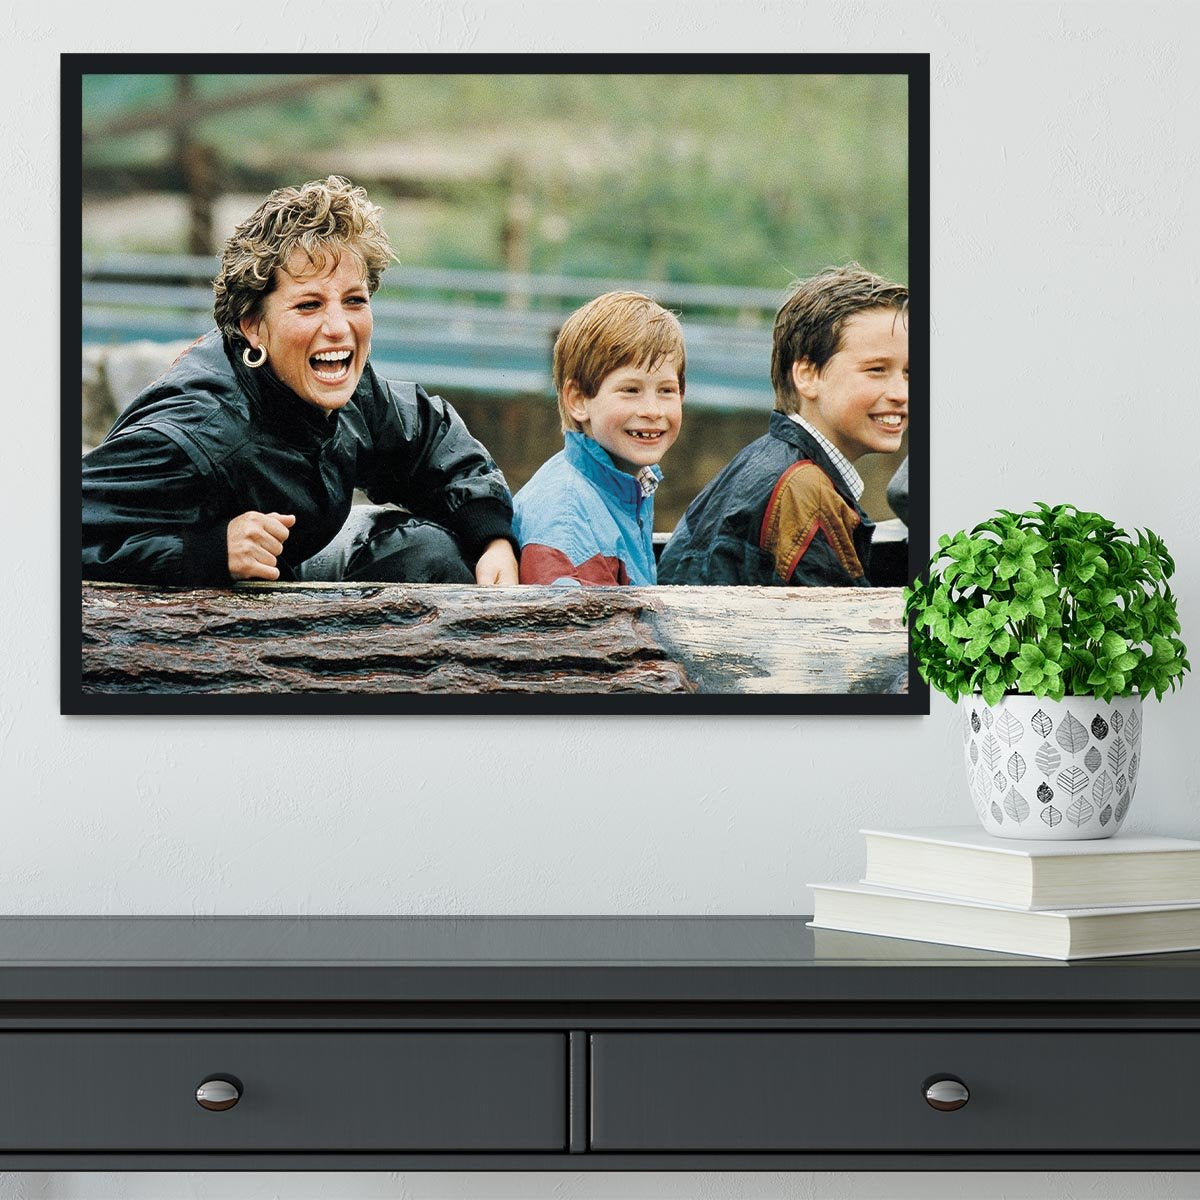 Princess Diana with Prince William and Prince Harry on ride Framed Print - Canvas Art Rocks - 2